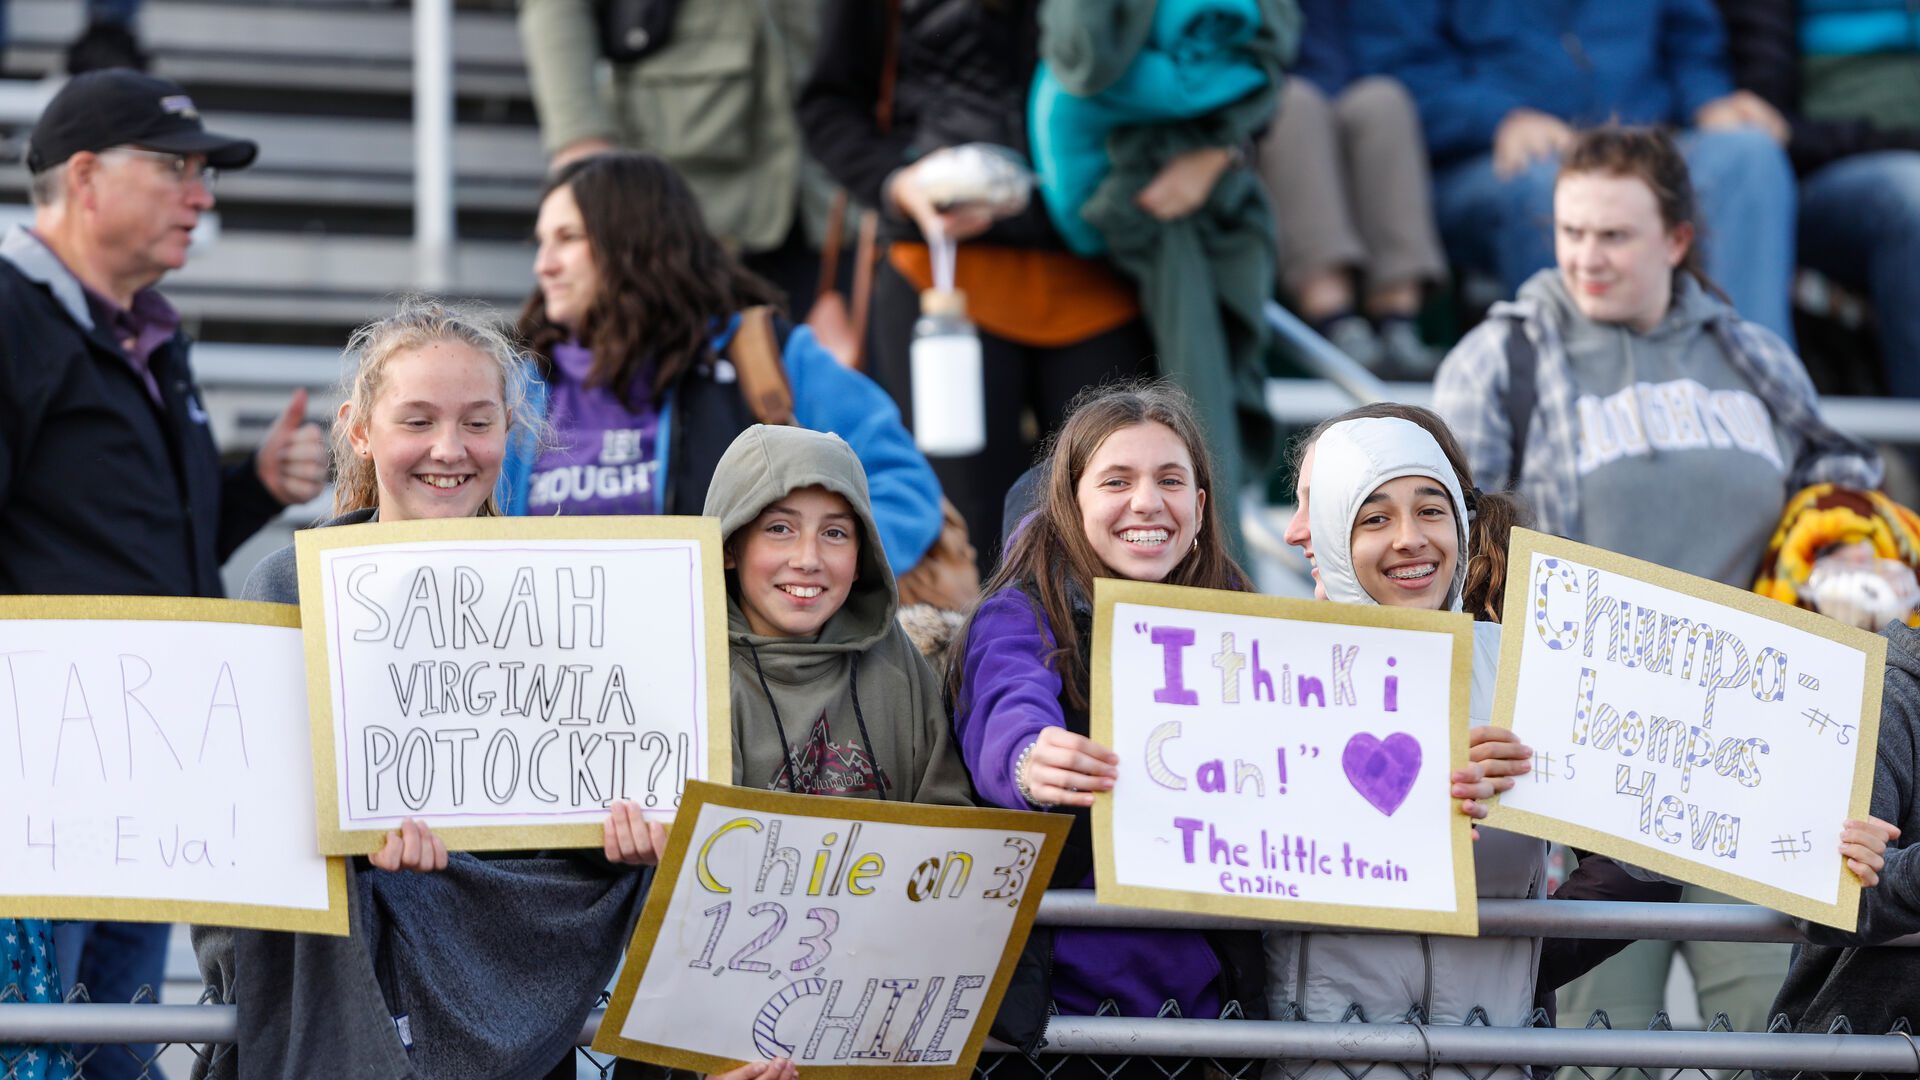 Four young ladies standing on bleachers with signs during Houghton Homecoming sporting event.